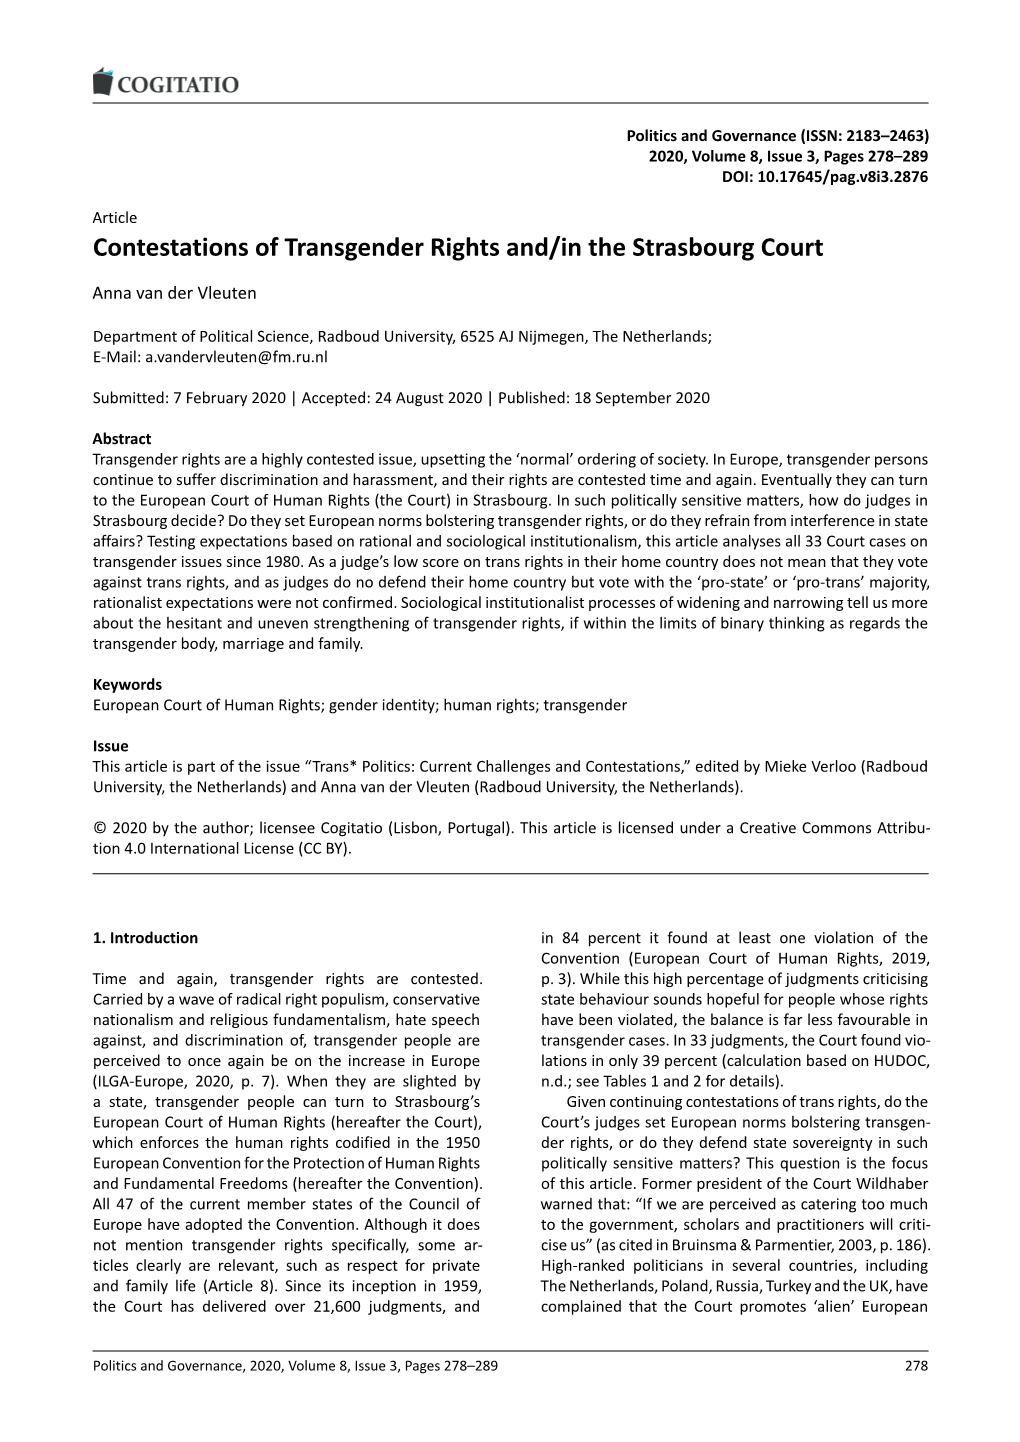 Contestations of Transgender Rights And/In the Strasbourg Court